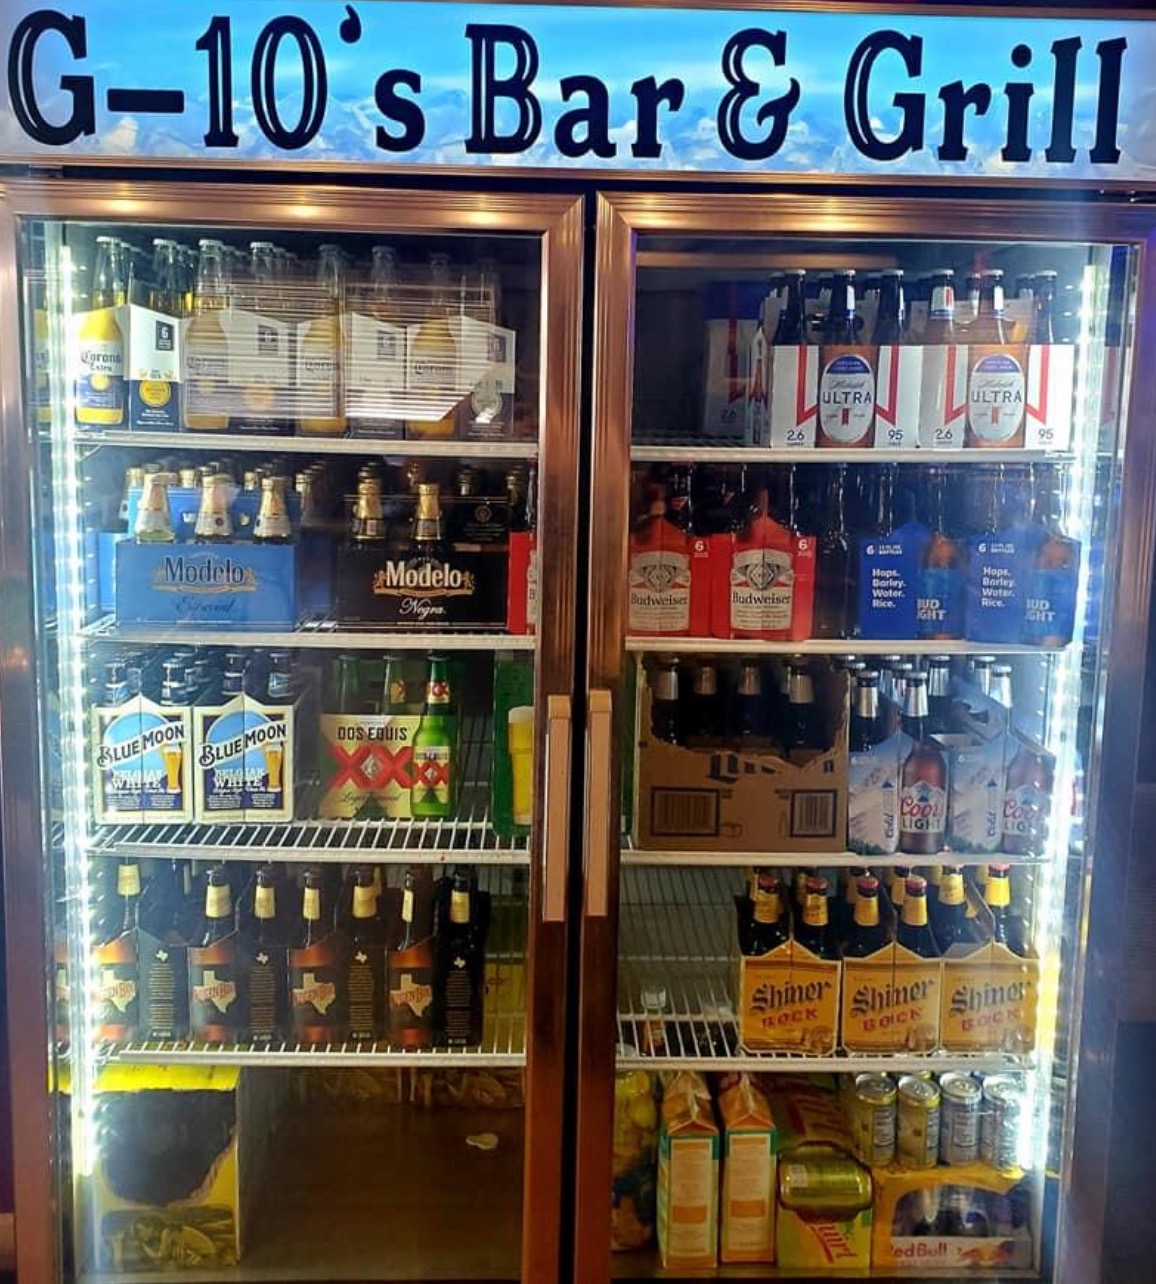 G-10’s Bar & Grill